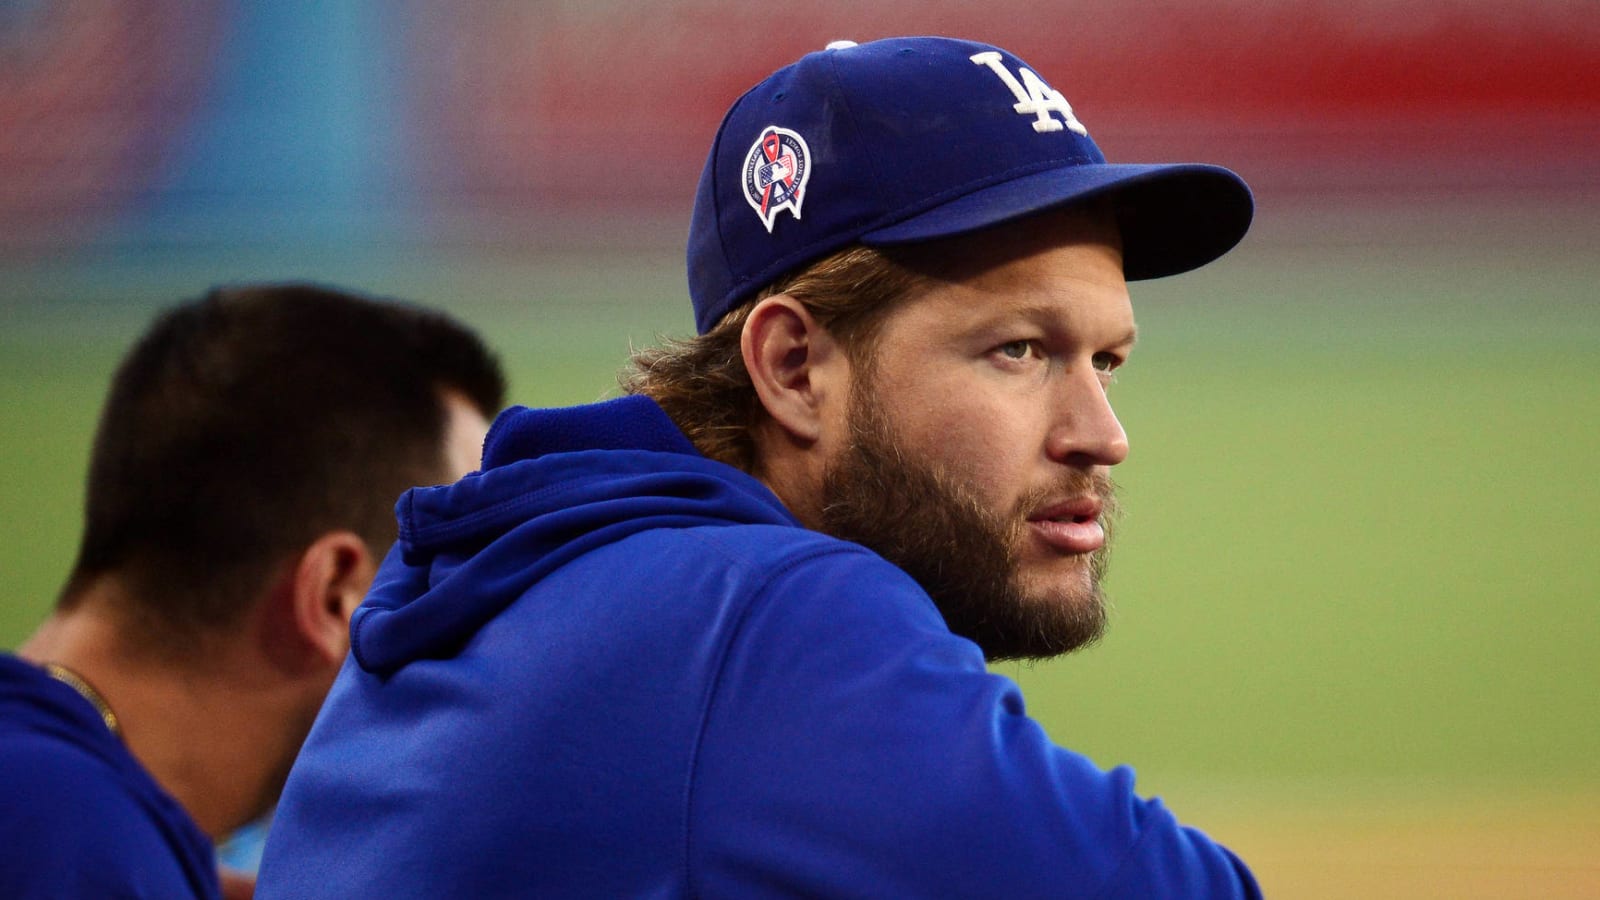 Clayton Kershaw gives hint about whether he will retire